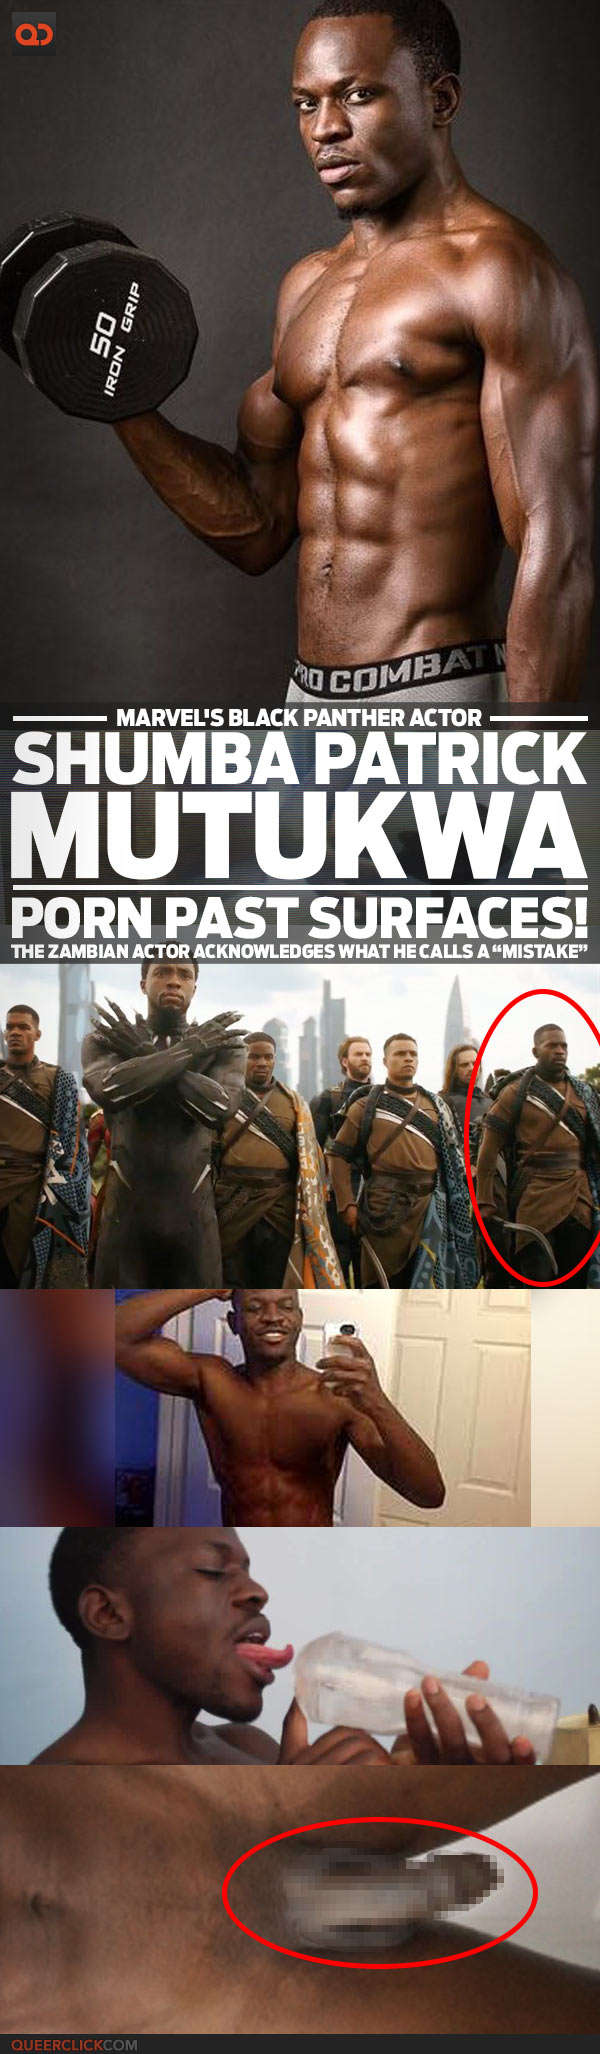 Marvel Live Action Porn - Shumba Patrick Mutukwa, Marvel's Black Panther Actor, Porn Past Surfaces! -  The Zambian Actor Acknowledges What He Calls A â€œMistakeâ€ - QueerClick